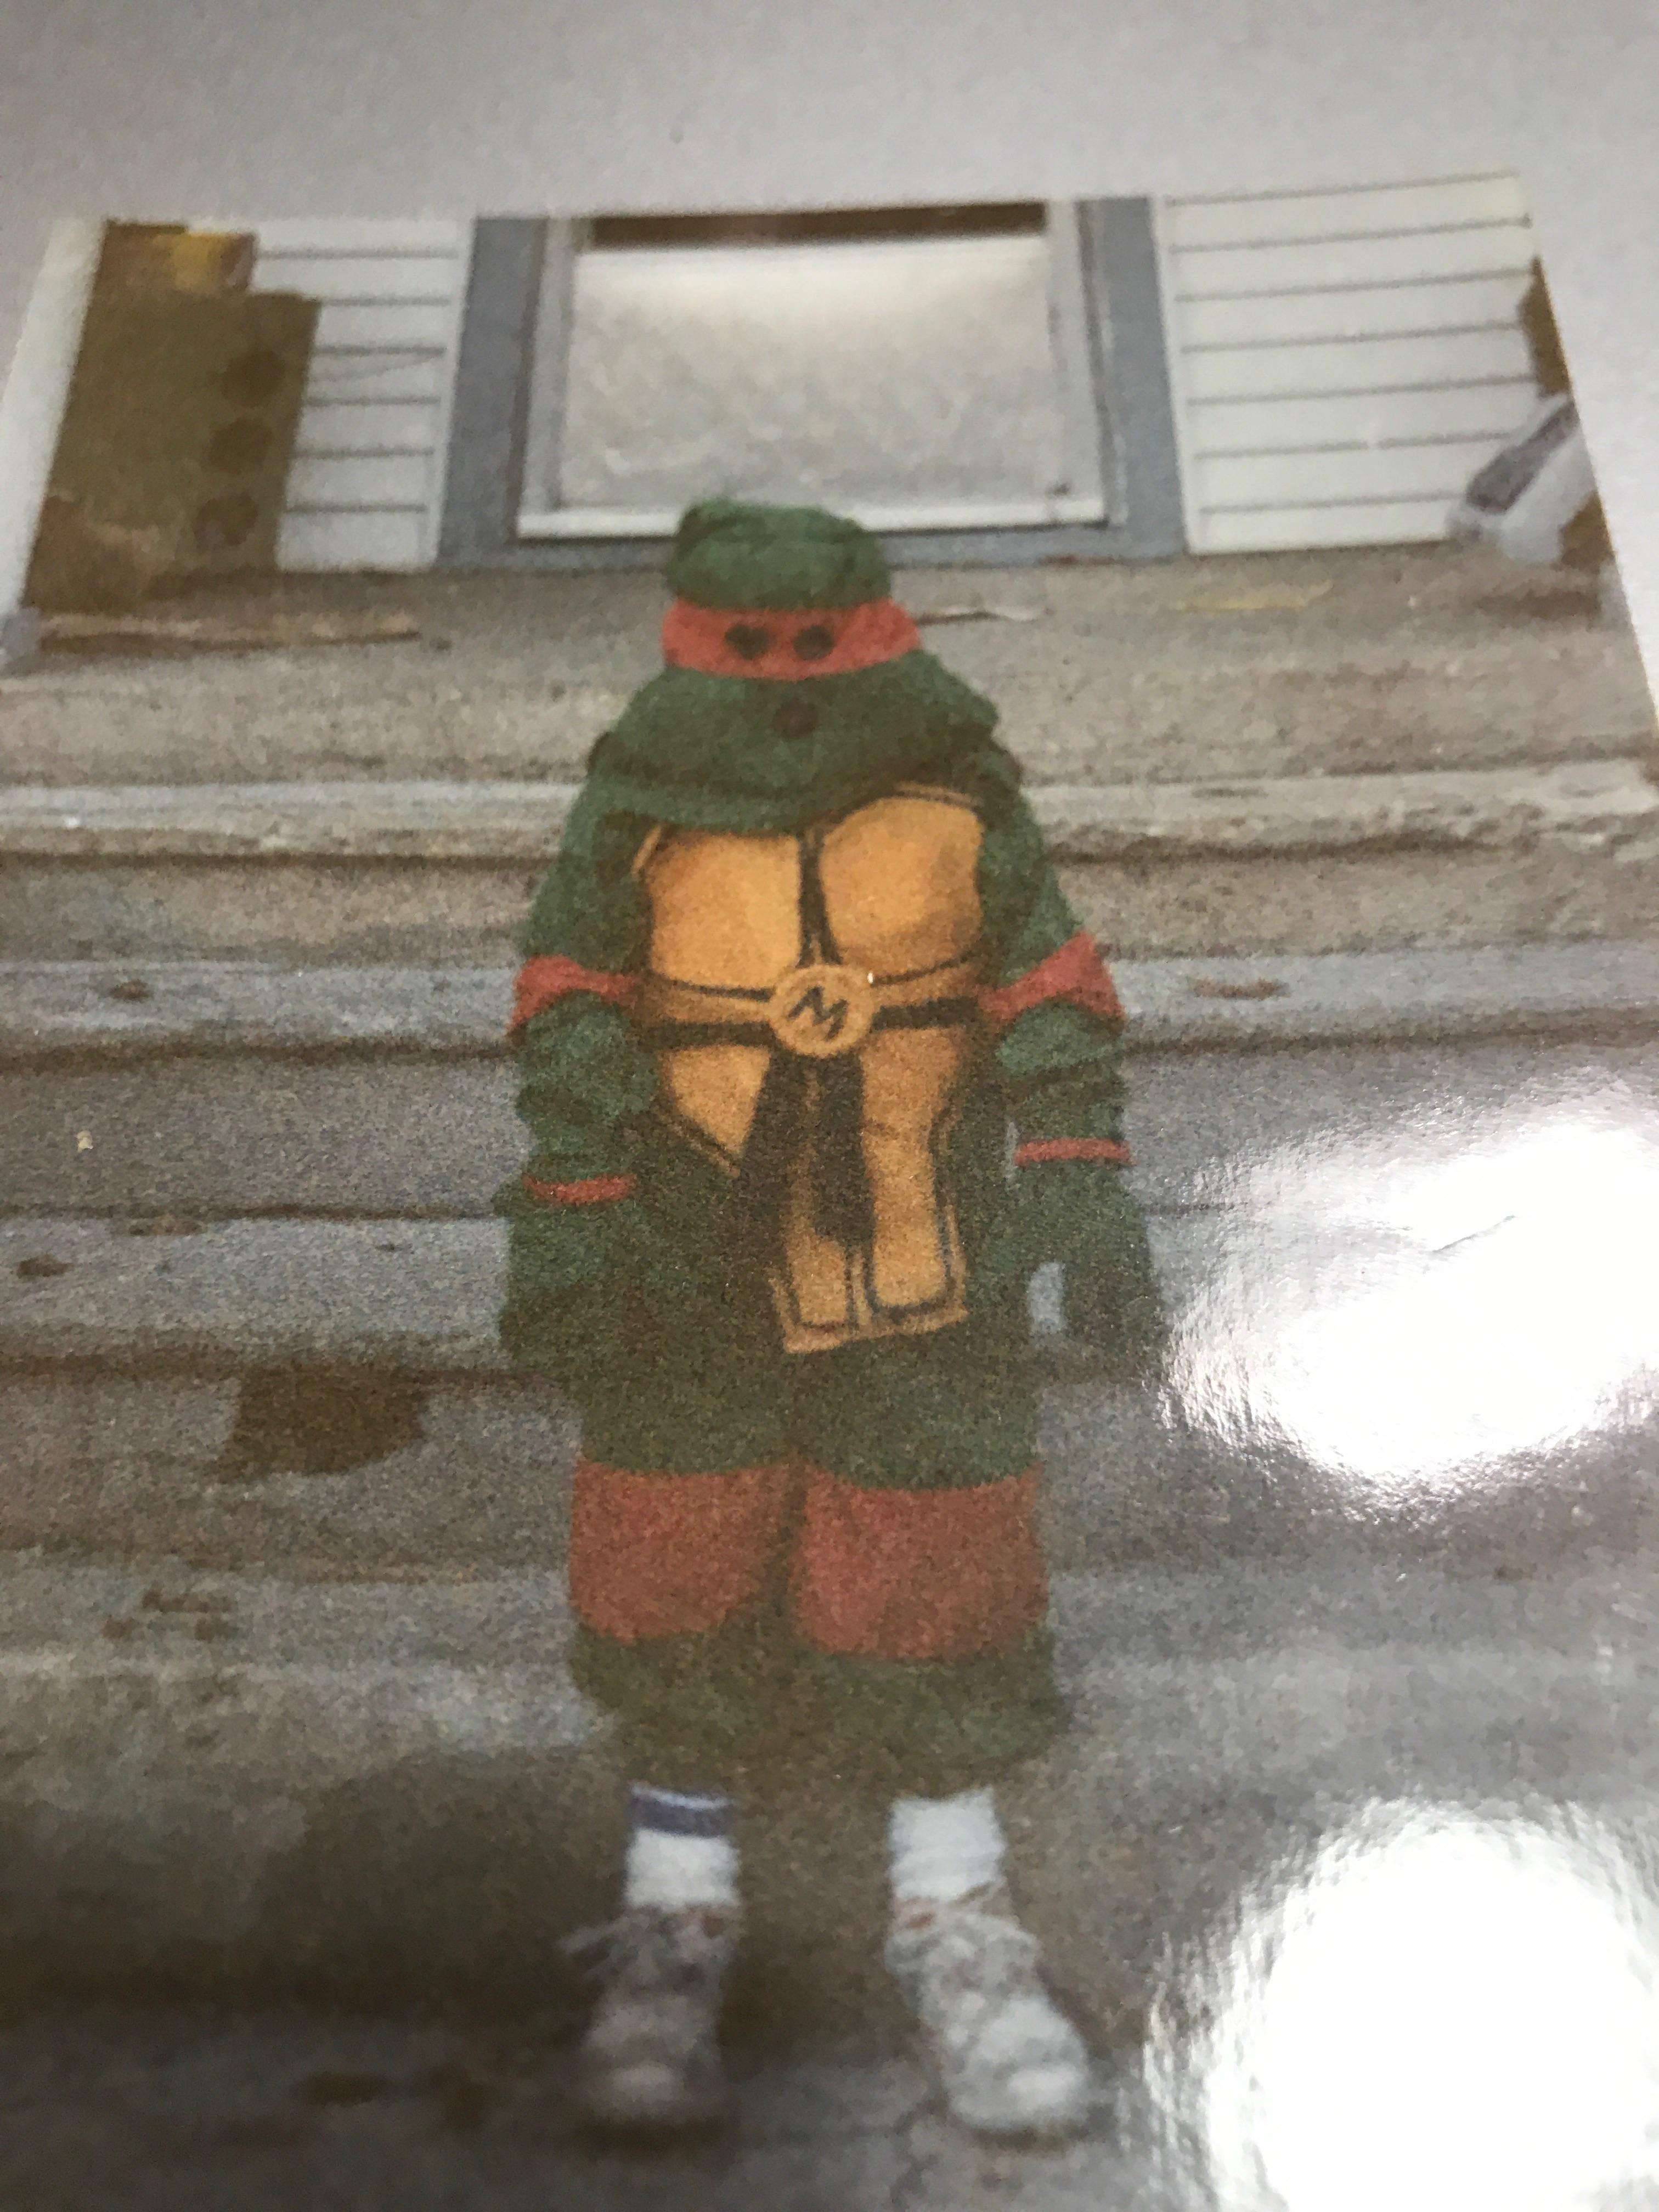 image showing My dad was going through old photos recently, He found this picture of me on Halloween dressed as Michelangelo, my mom made this costume from scratch